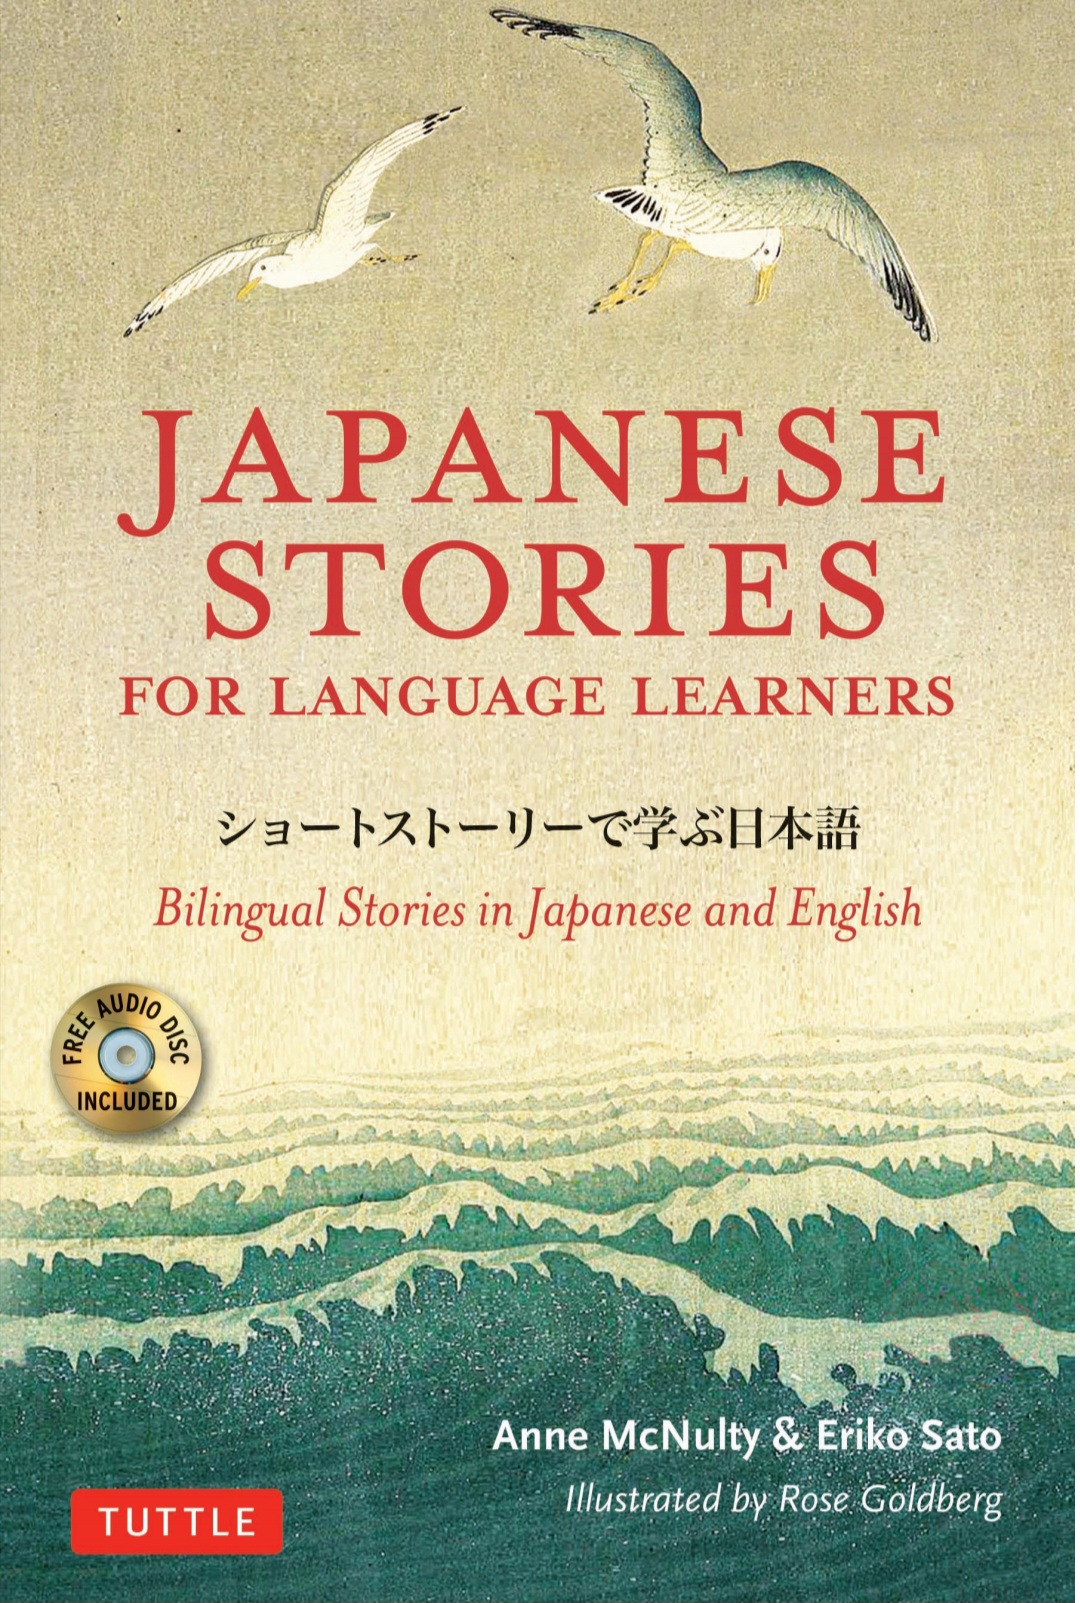 Japanese Stories for Language Learners Bilingual Stories in Japanese and English - PDF